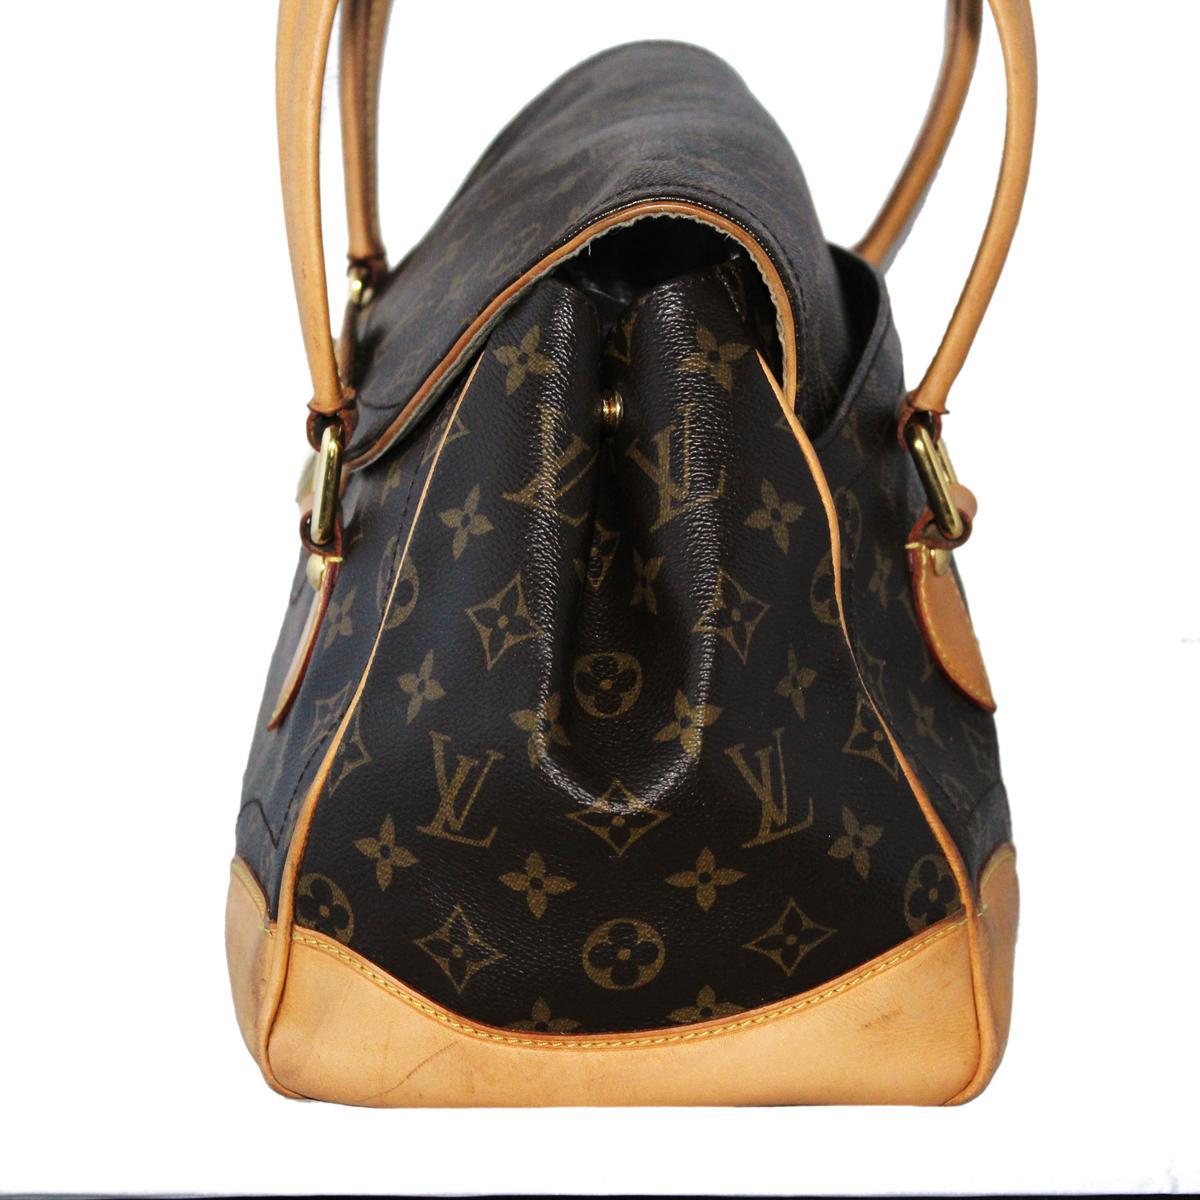 Iconic Louis Vuitton Beverly Bag
2007 Collection
Monogram
Two leather handles
Golden metal closure
Large external pocket
Suede internal
Internal pocket and small holder
Cm 36 x 22 x 20 (14.1 x 8.6 x 7.8 inches)
With dustbag
Worldwide express